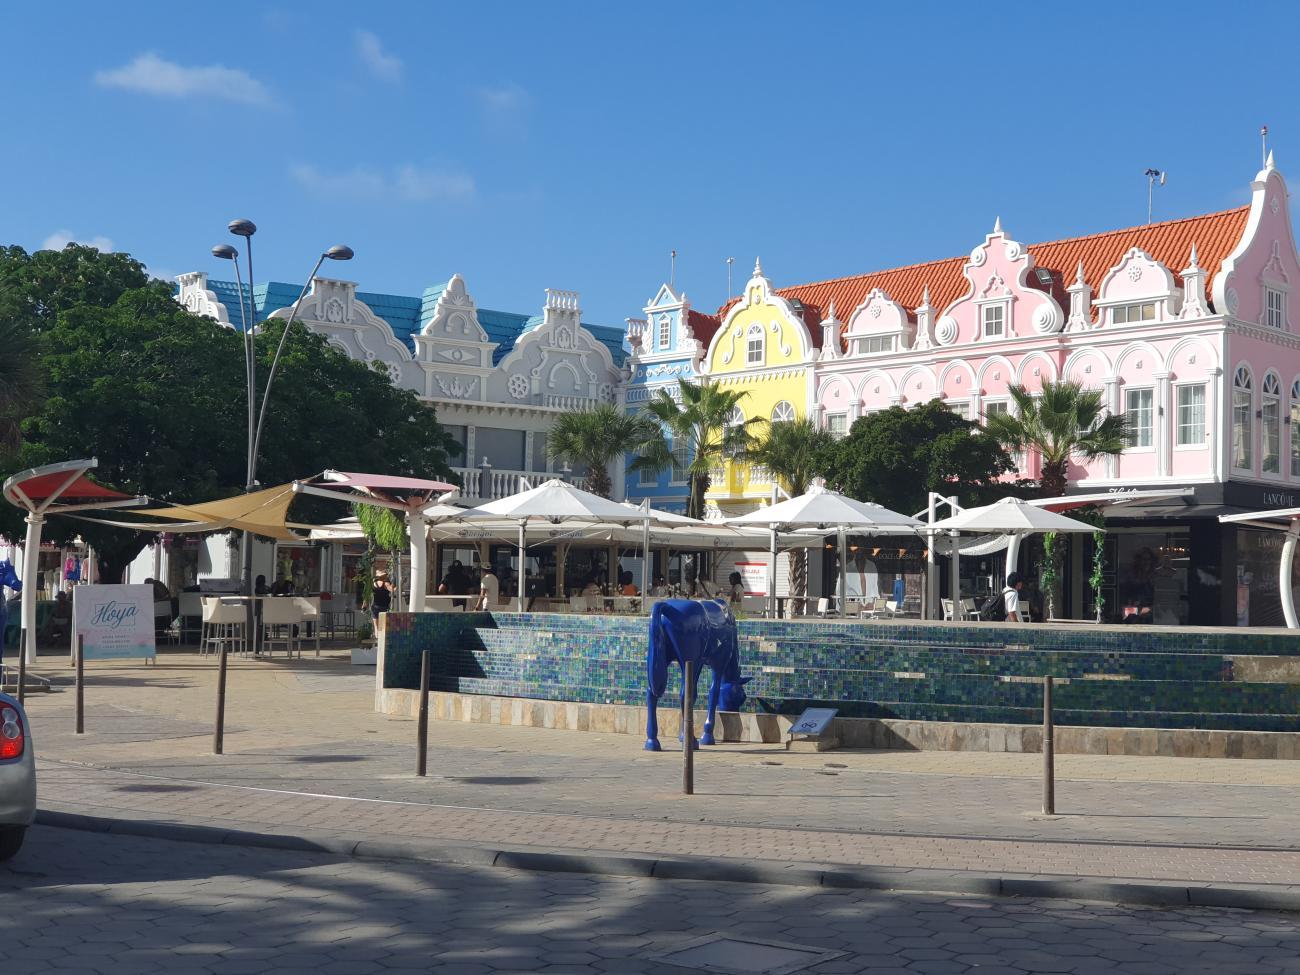 Traditional architecture in downtown Oranjestad, the capital of Aruba.